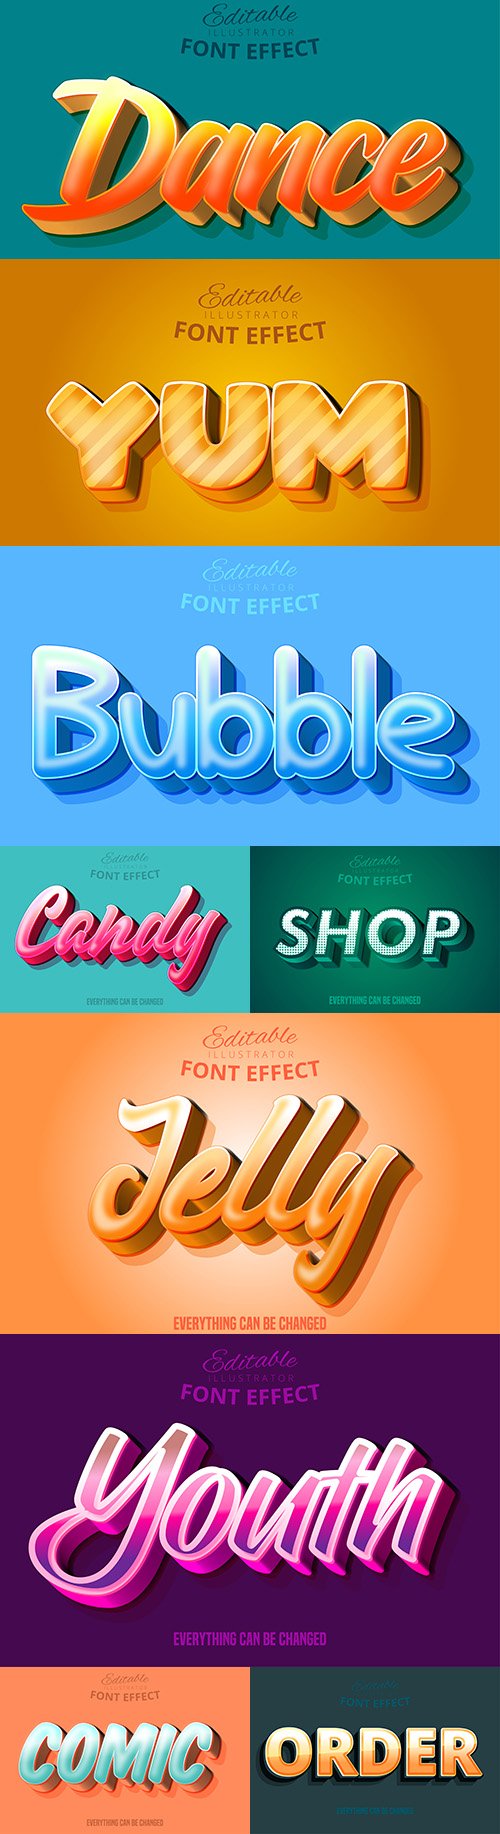 Editable font effect text collection illustration 25